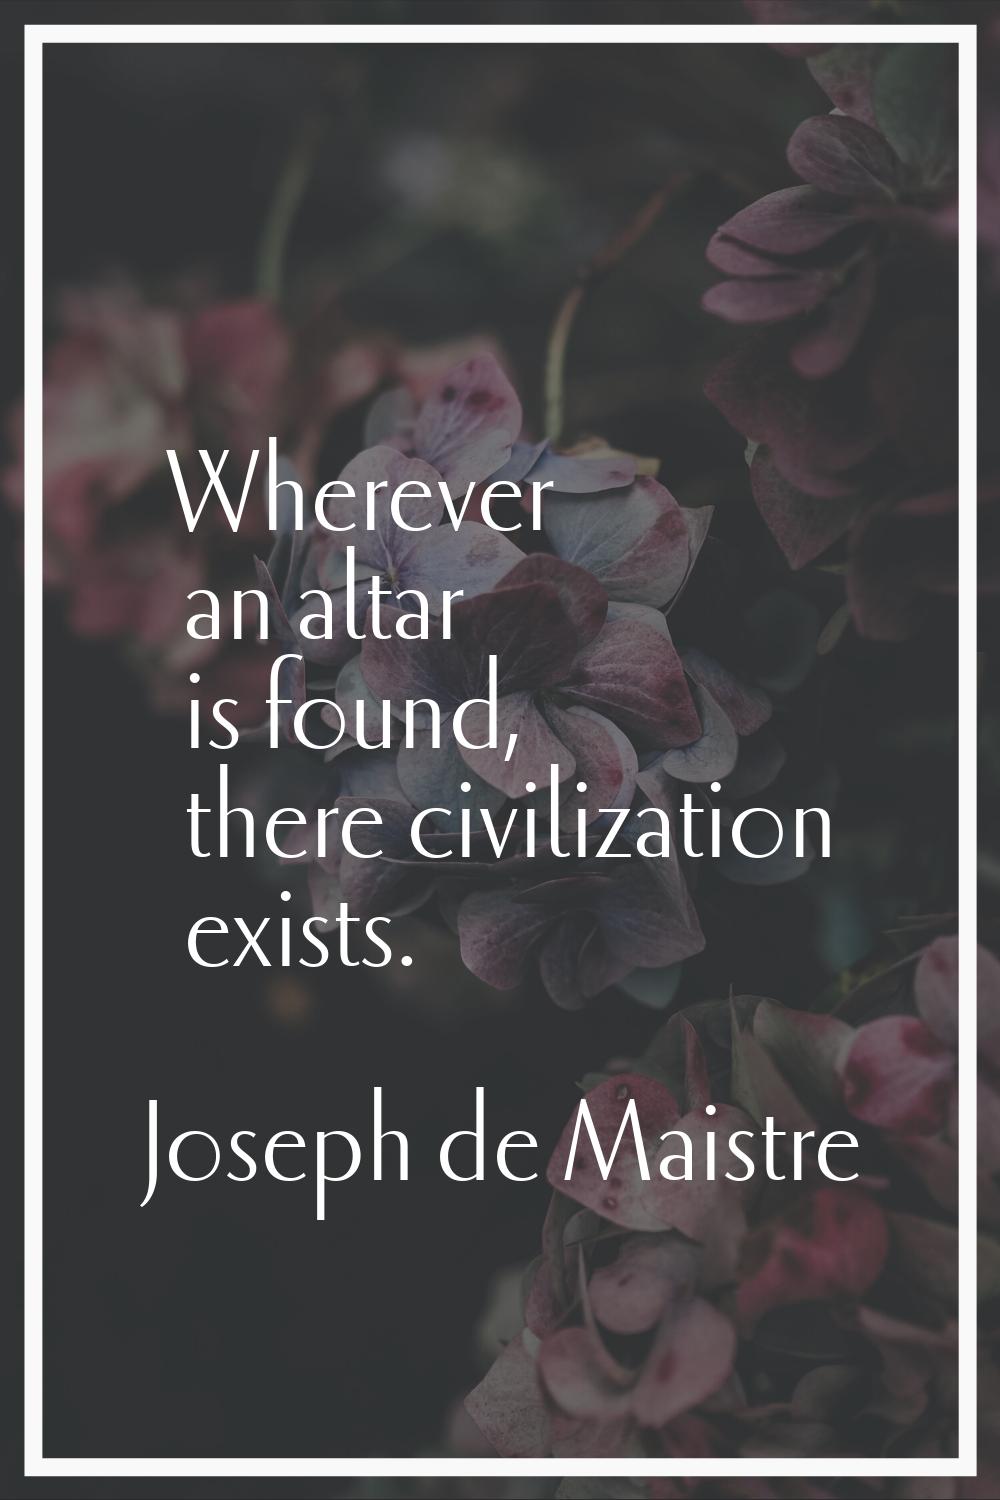 Wherever an altar is found, there civilization exists.